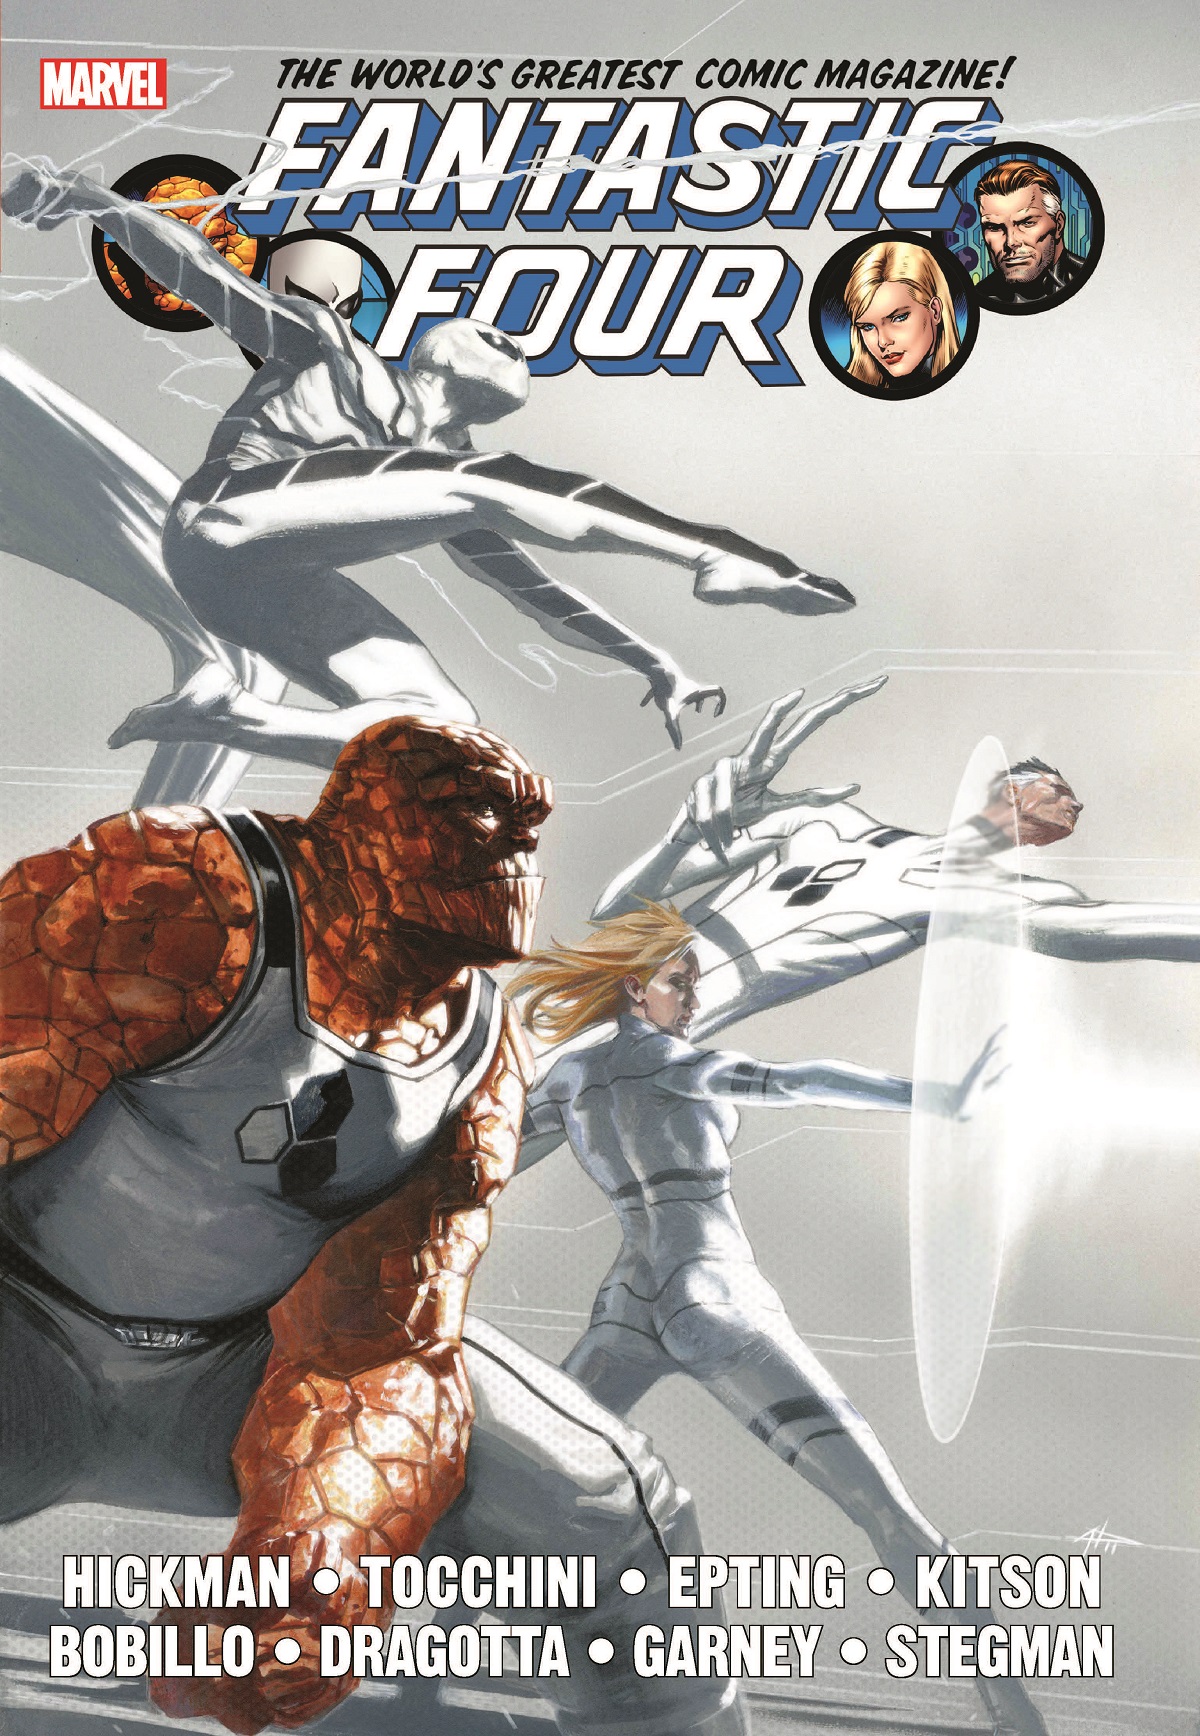 Fantastic Four By Jonathan Hickman Omnibus Vol. 2 (Hardcover)